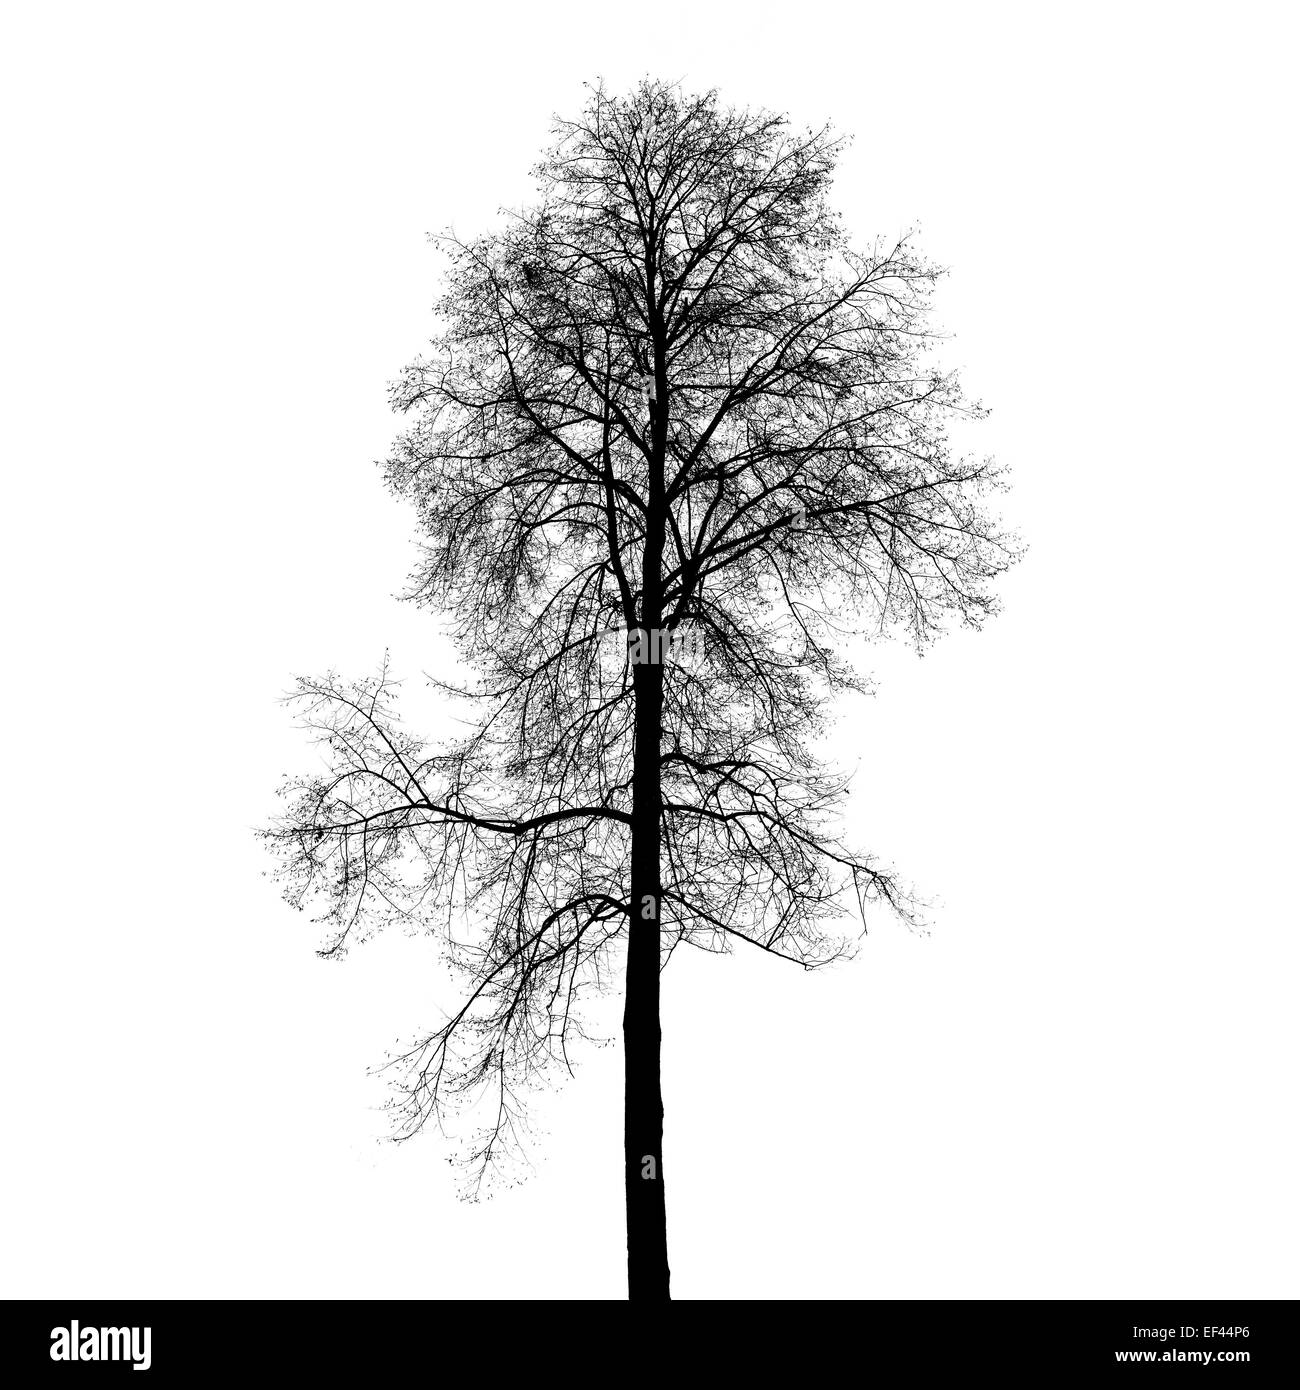 Leafless birch tree silhouette isolated on white background. Stylized ...